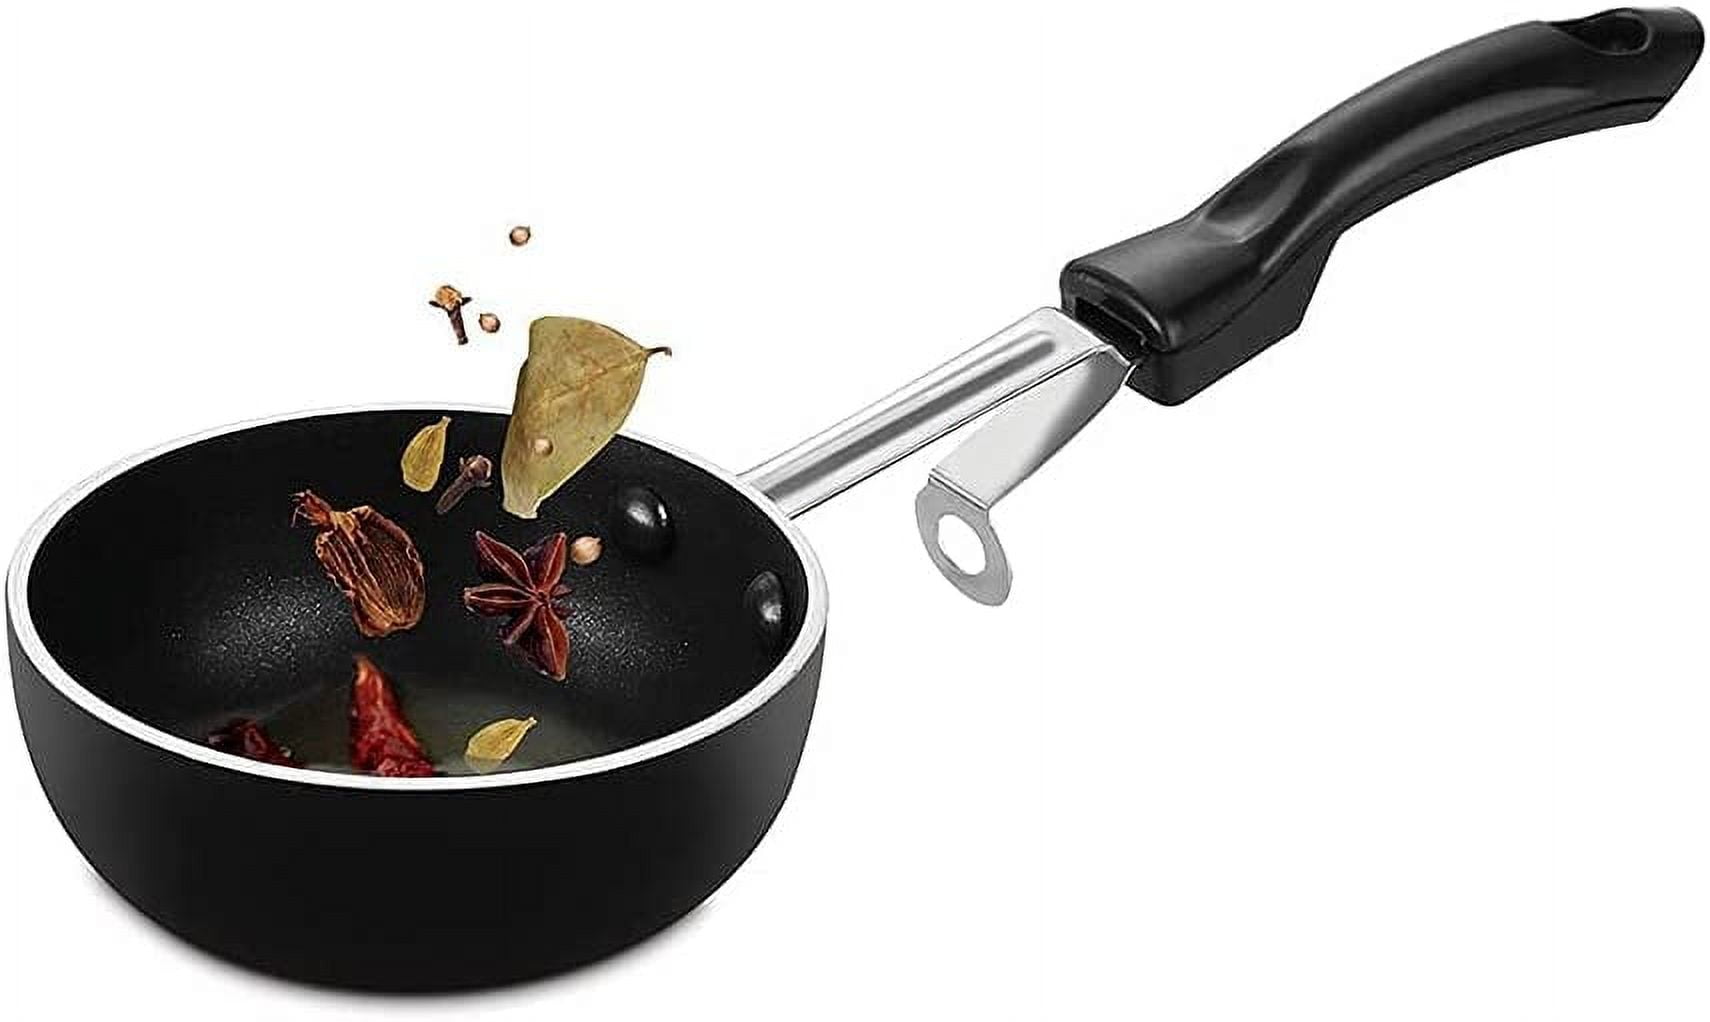 Pigeon Nonstick Skillet - 8 - Small Portable Frying Pan - Scratch Res –  Vedic Satvic